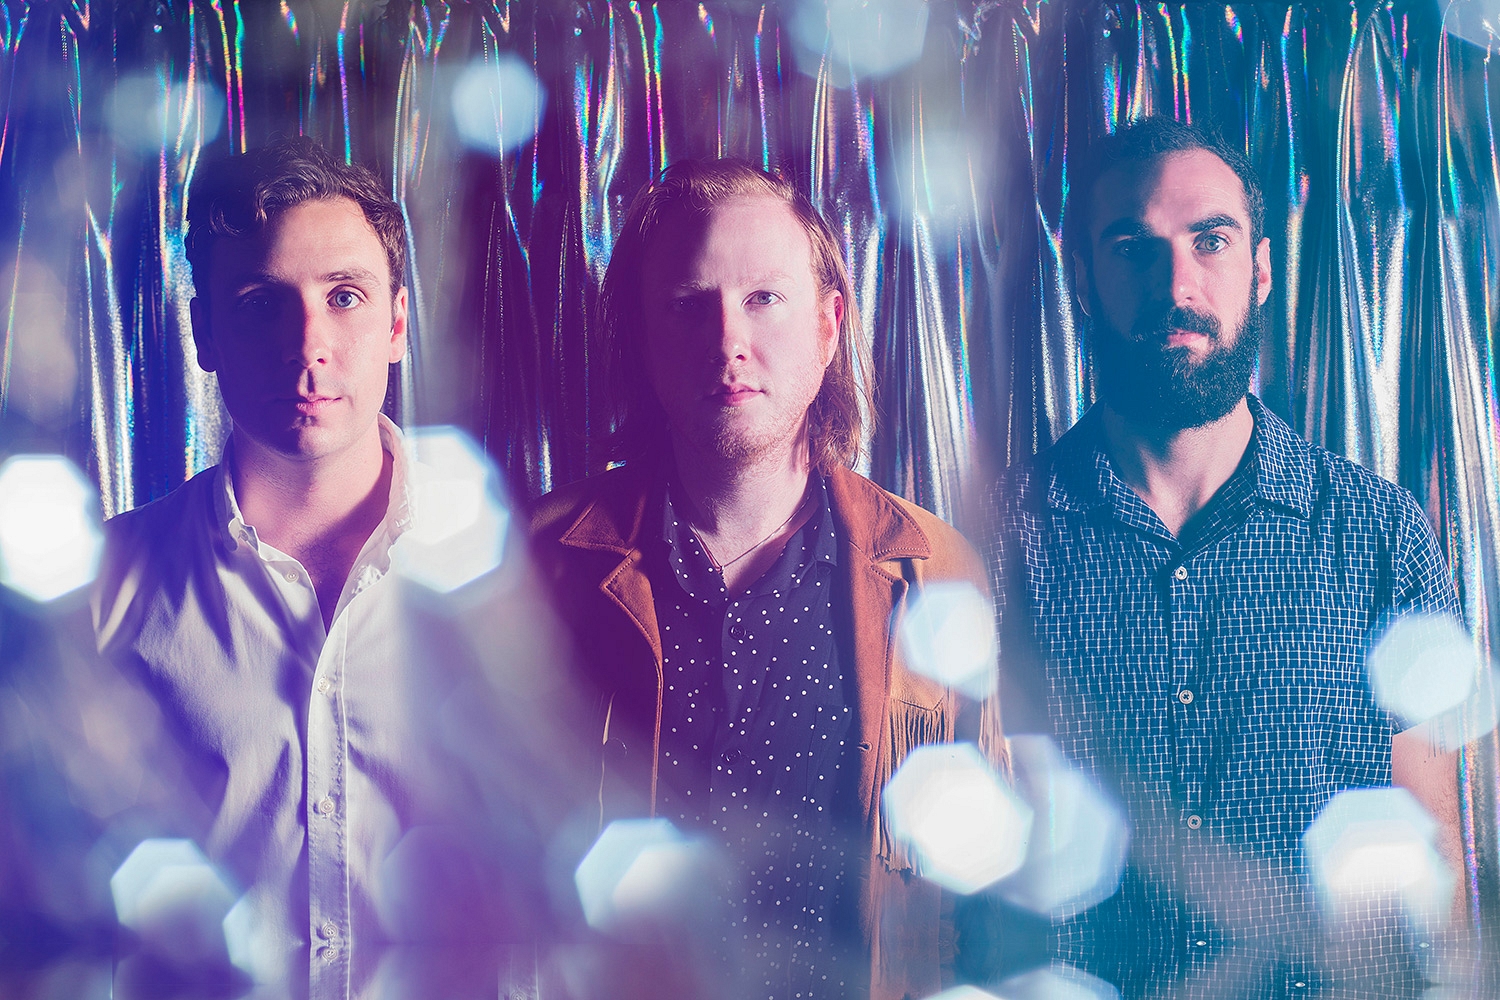 New issue of DIY out now, feat. Two Door Cinema Club, The Wytches, AlunaGeorge & more